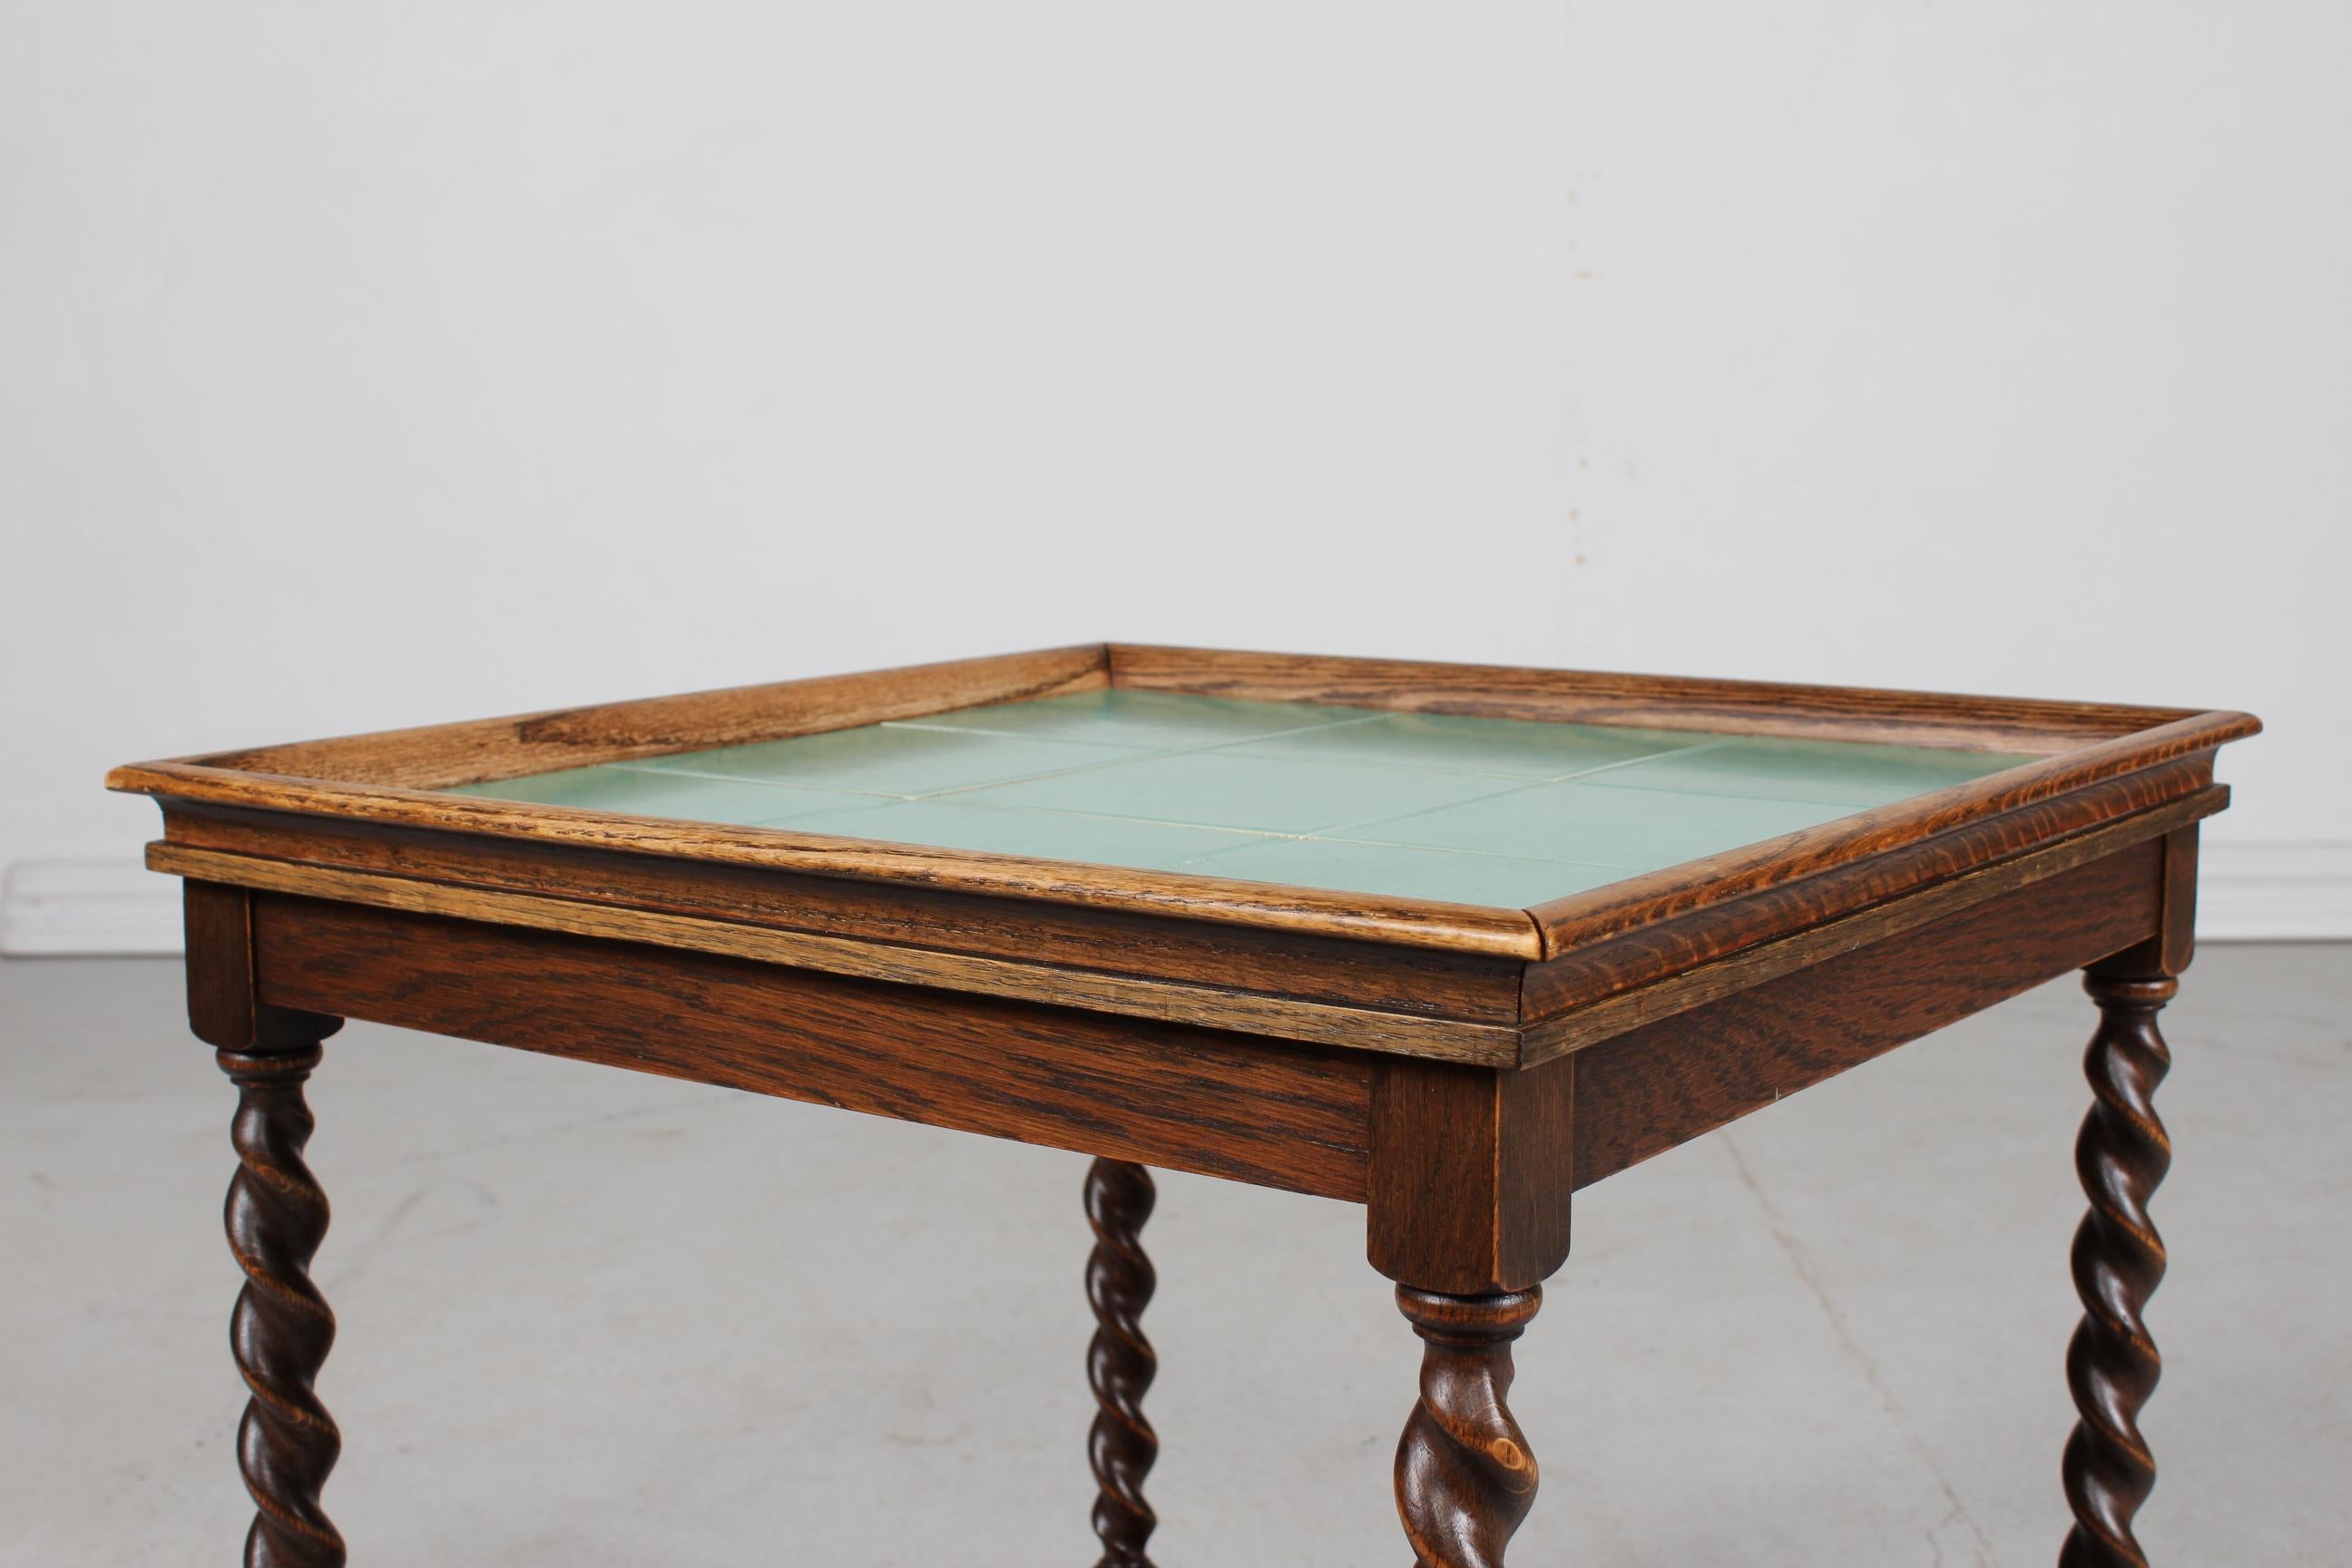 Cane Art Deco Side Table with Jade Green Tiles by Danish Cabinetmaker, 1930-1940s For Sale